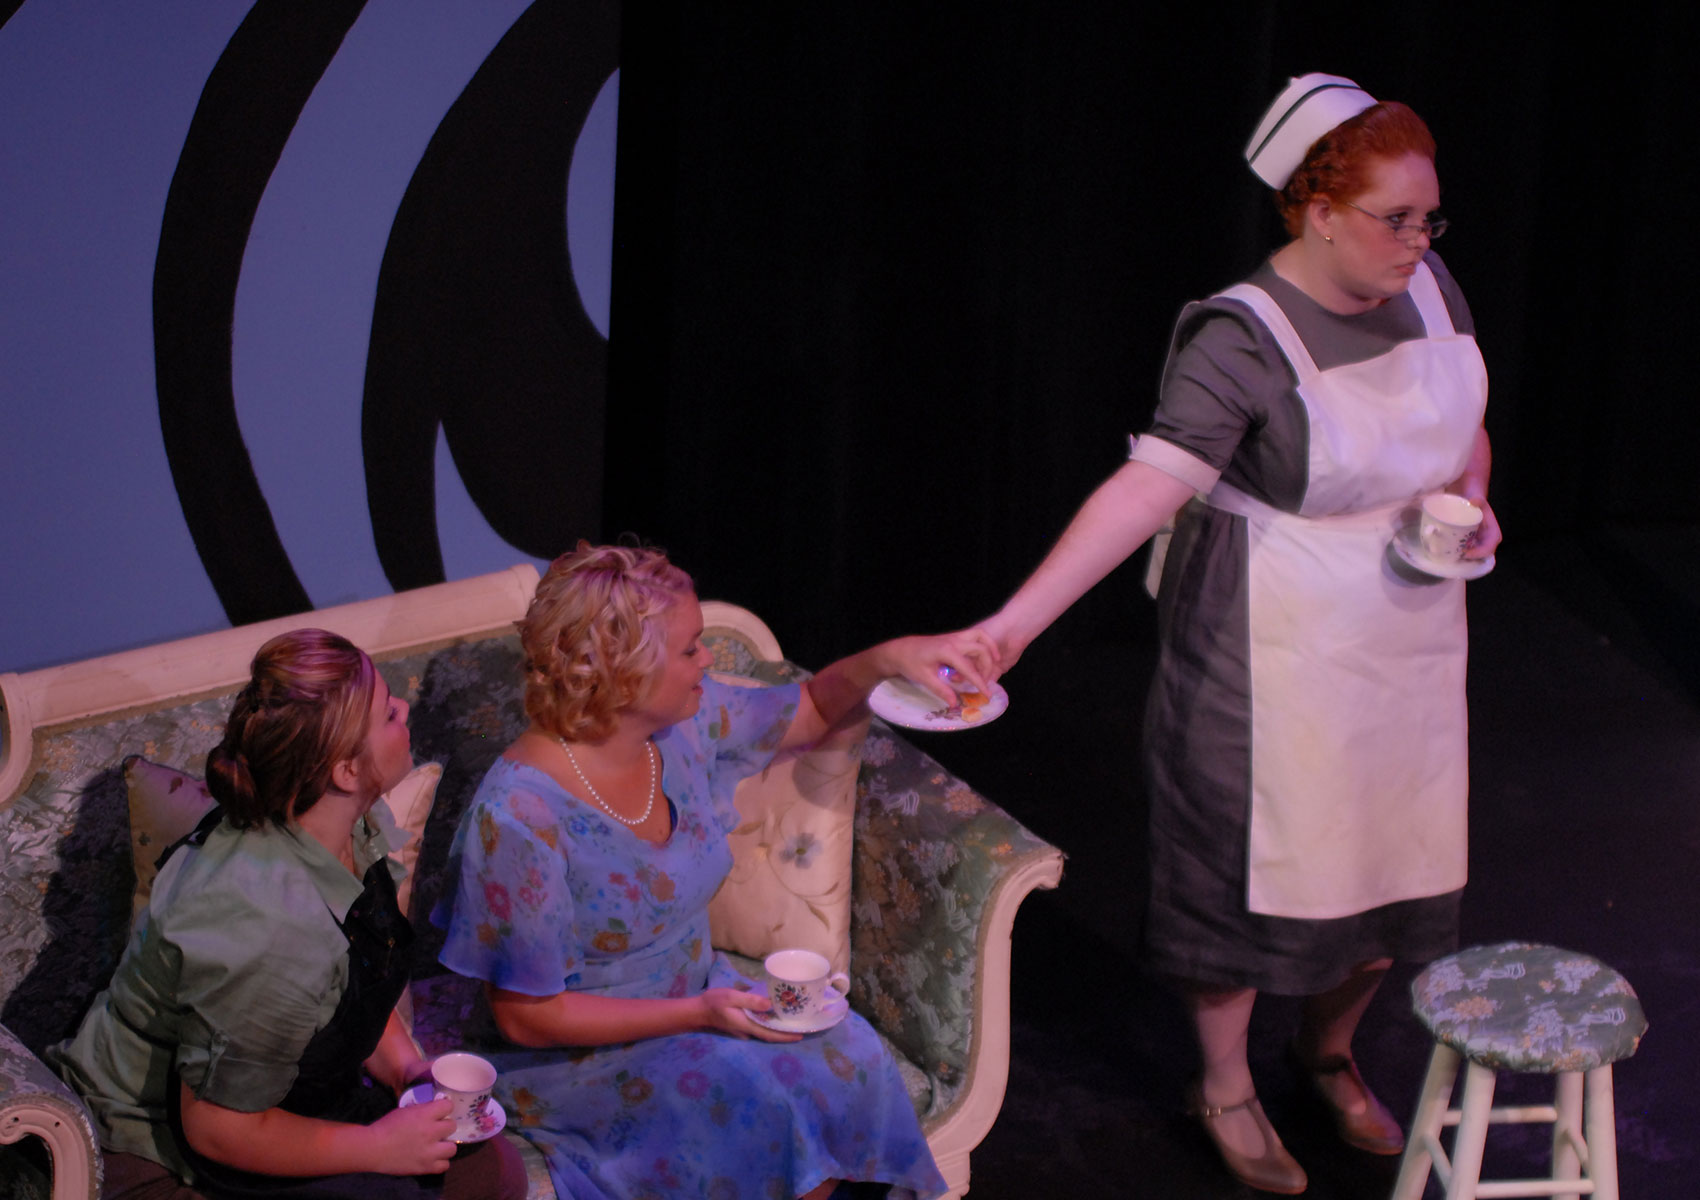 Two women sit on a couch while the woman on the right accepts a cookie from a saucer held by a maid, who looks away from the woman toward the audience while holding a teacup and saucer.